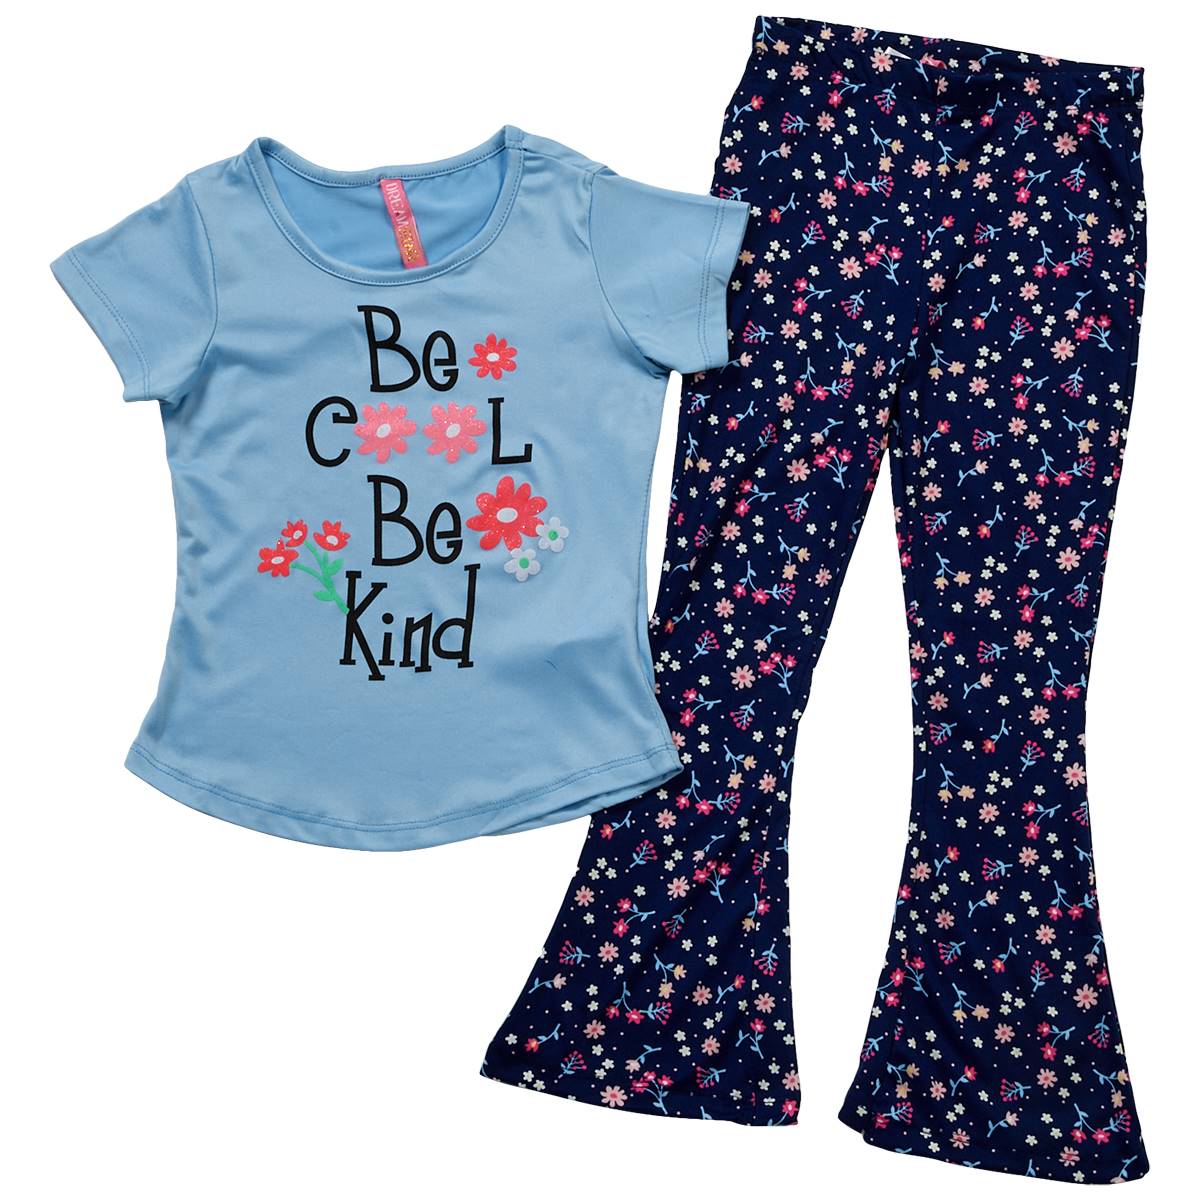 Girls (7-16) Dream Star Be Cool & Kind Tee Ditsy Flare Pants Set